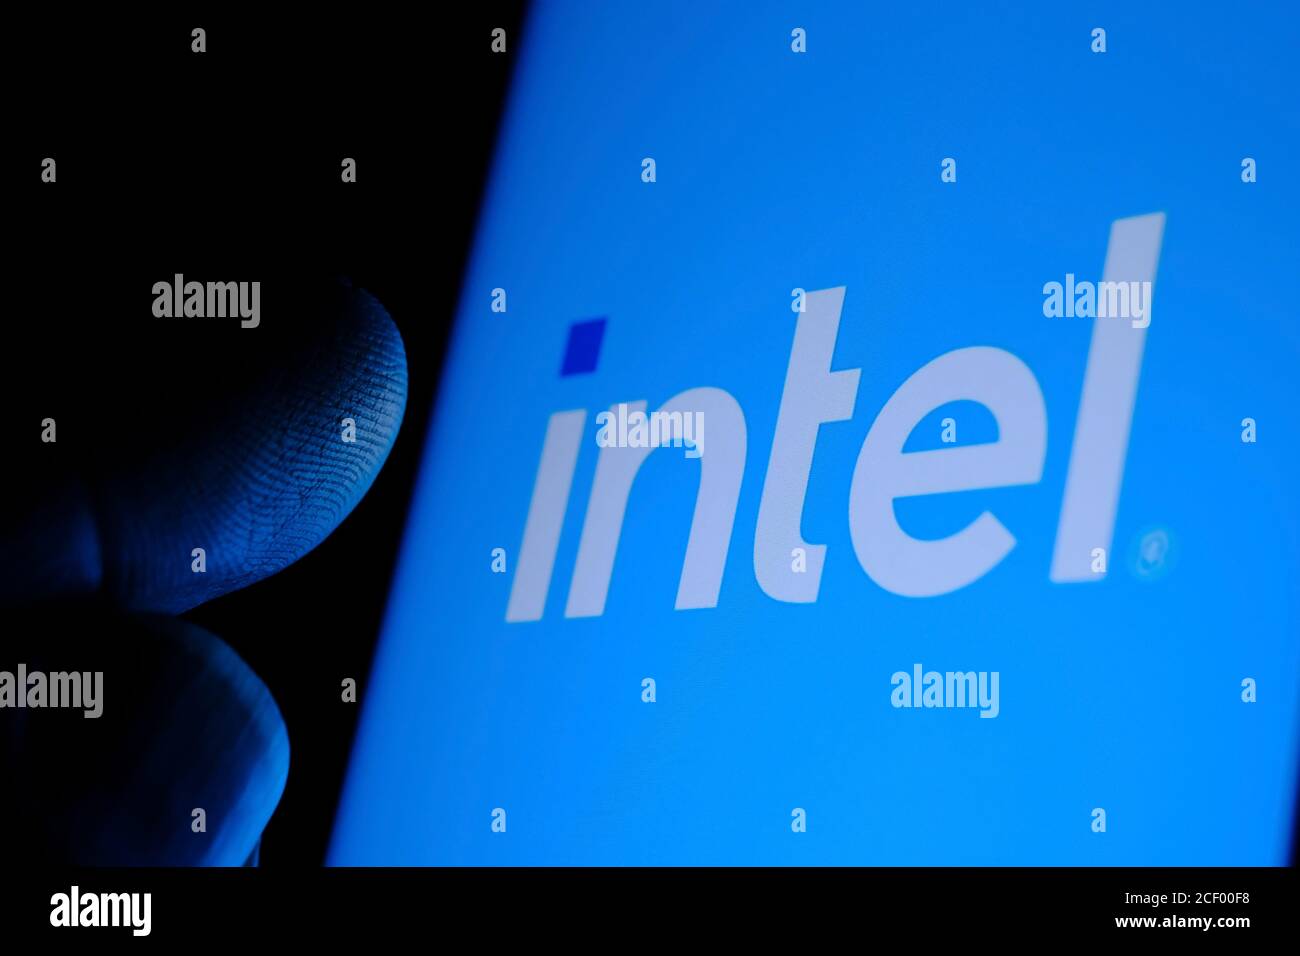 New Intel logo seen on the screen and blurred fingertip touching it in a dark. Intel presented its rebranded logotype o Stock Photo